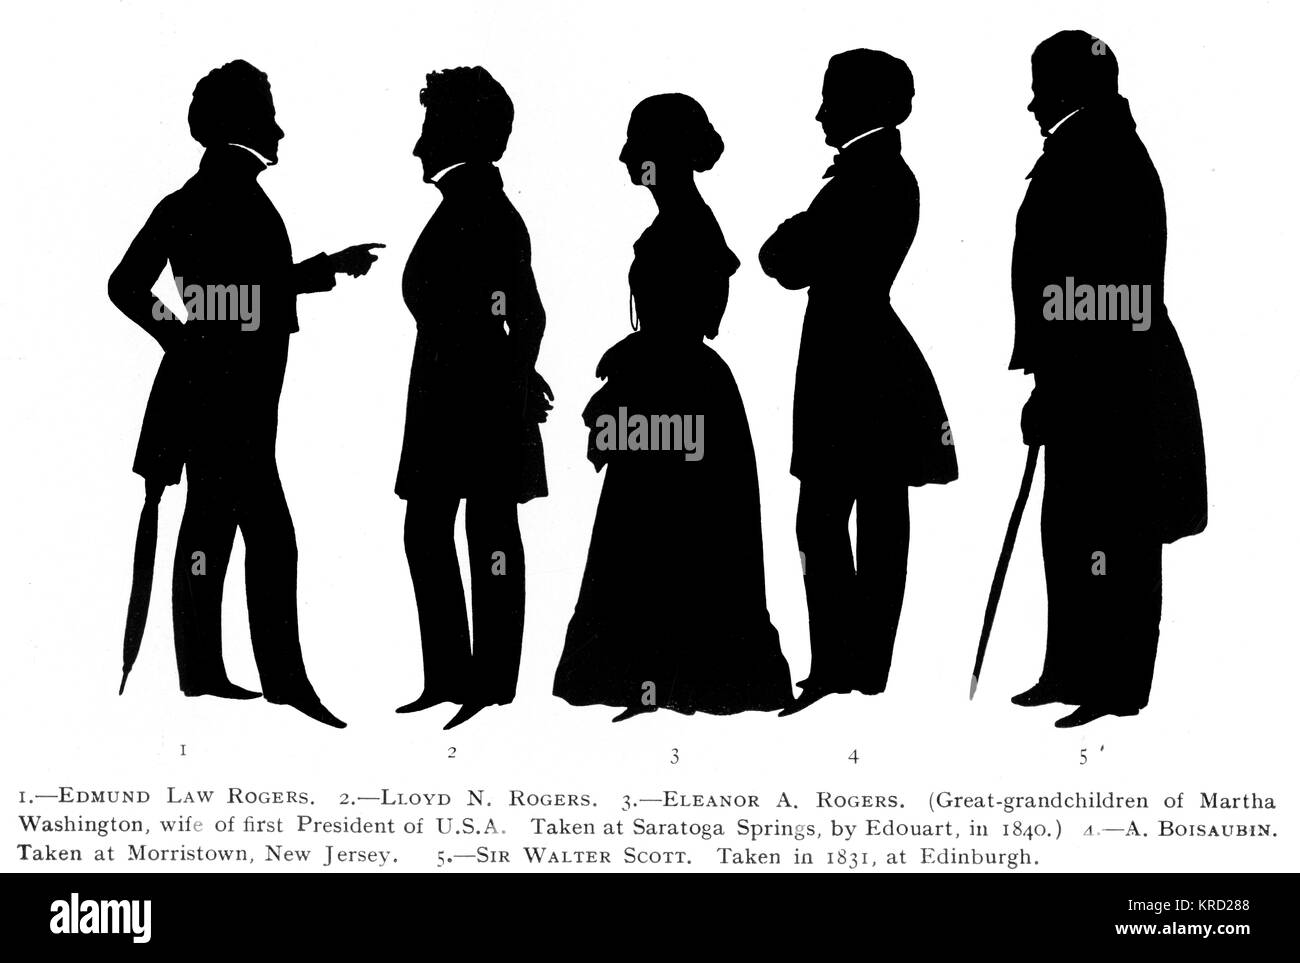 A series of silhouette portraits taken by Edouart.  From left, Edmund Law Rogers, Lloyd N. Rogers, Eleanor A. Rogers (all great grandchildren of Martha Washington, wife of George Washington - are they not therefore his great grandchildren too?  I'm not sure but that's what the caption says!), A. Boisaubin (taken at Morristown, New Jersey) and finally, Sir Walter Scott, taken in 1831 at Edinburgh.     Date: 1830s Stock Photo